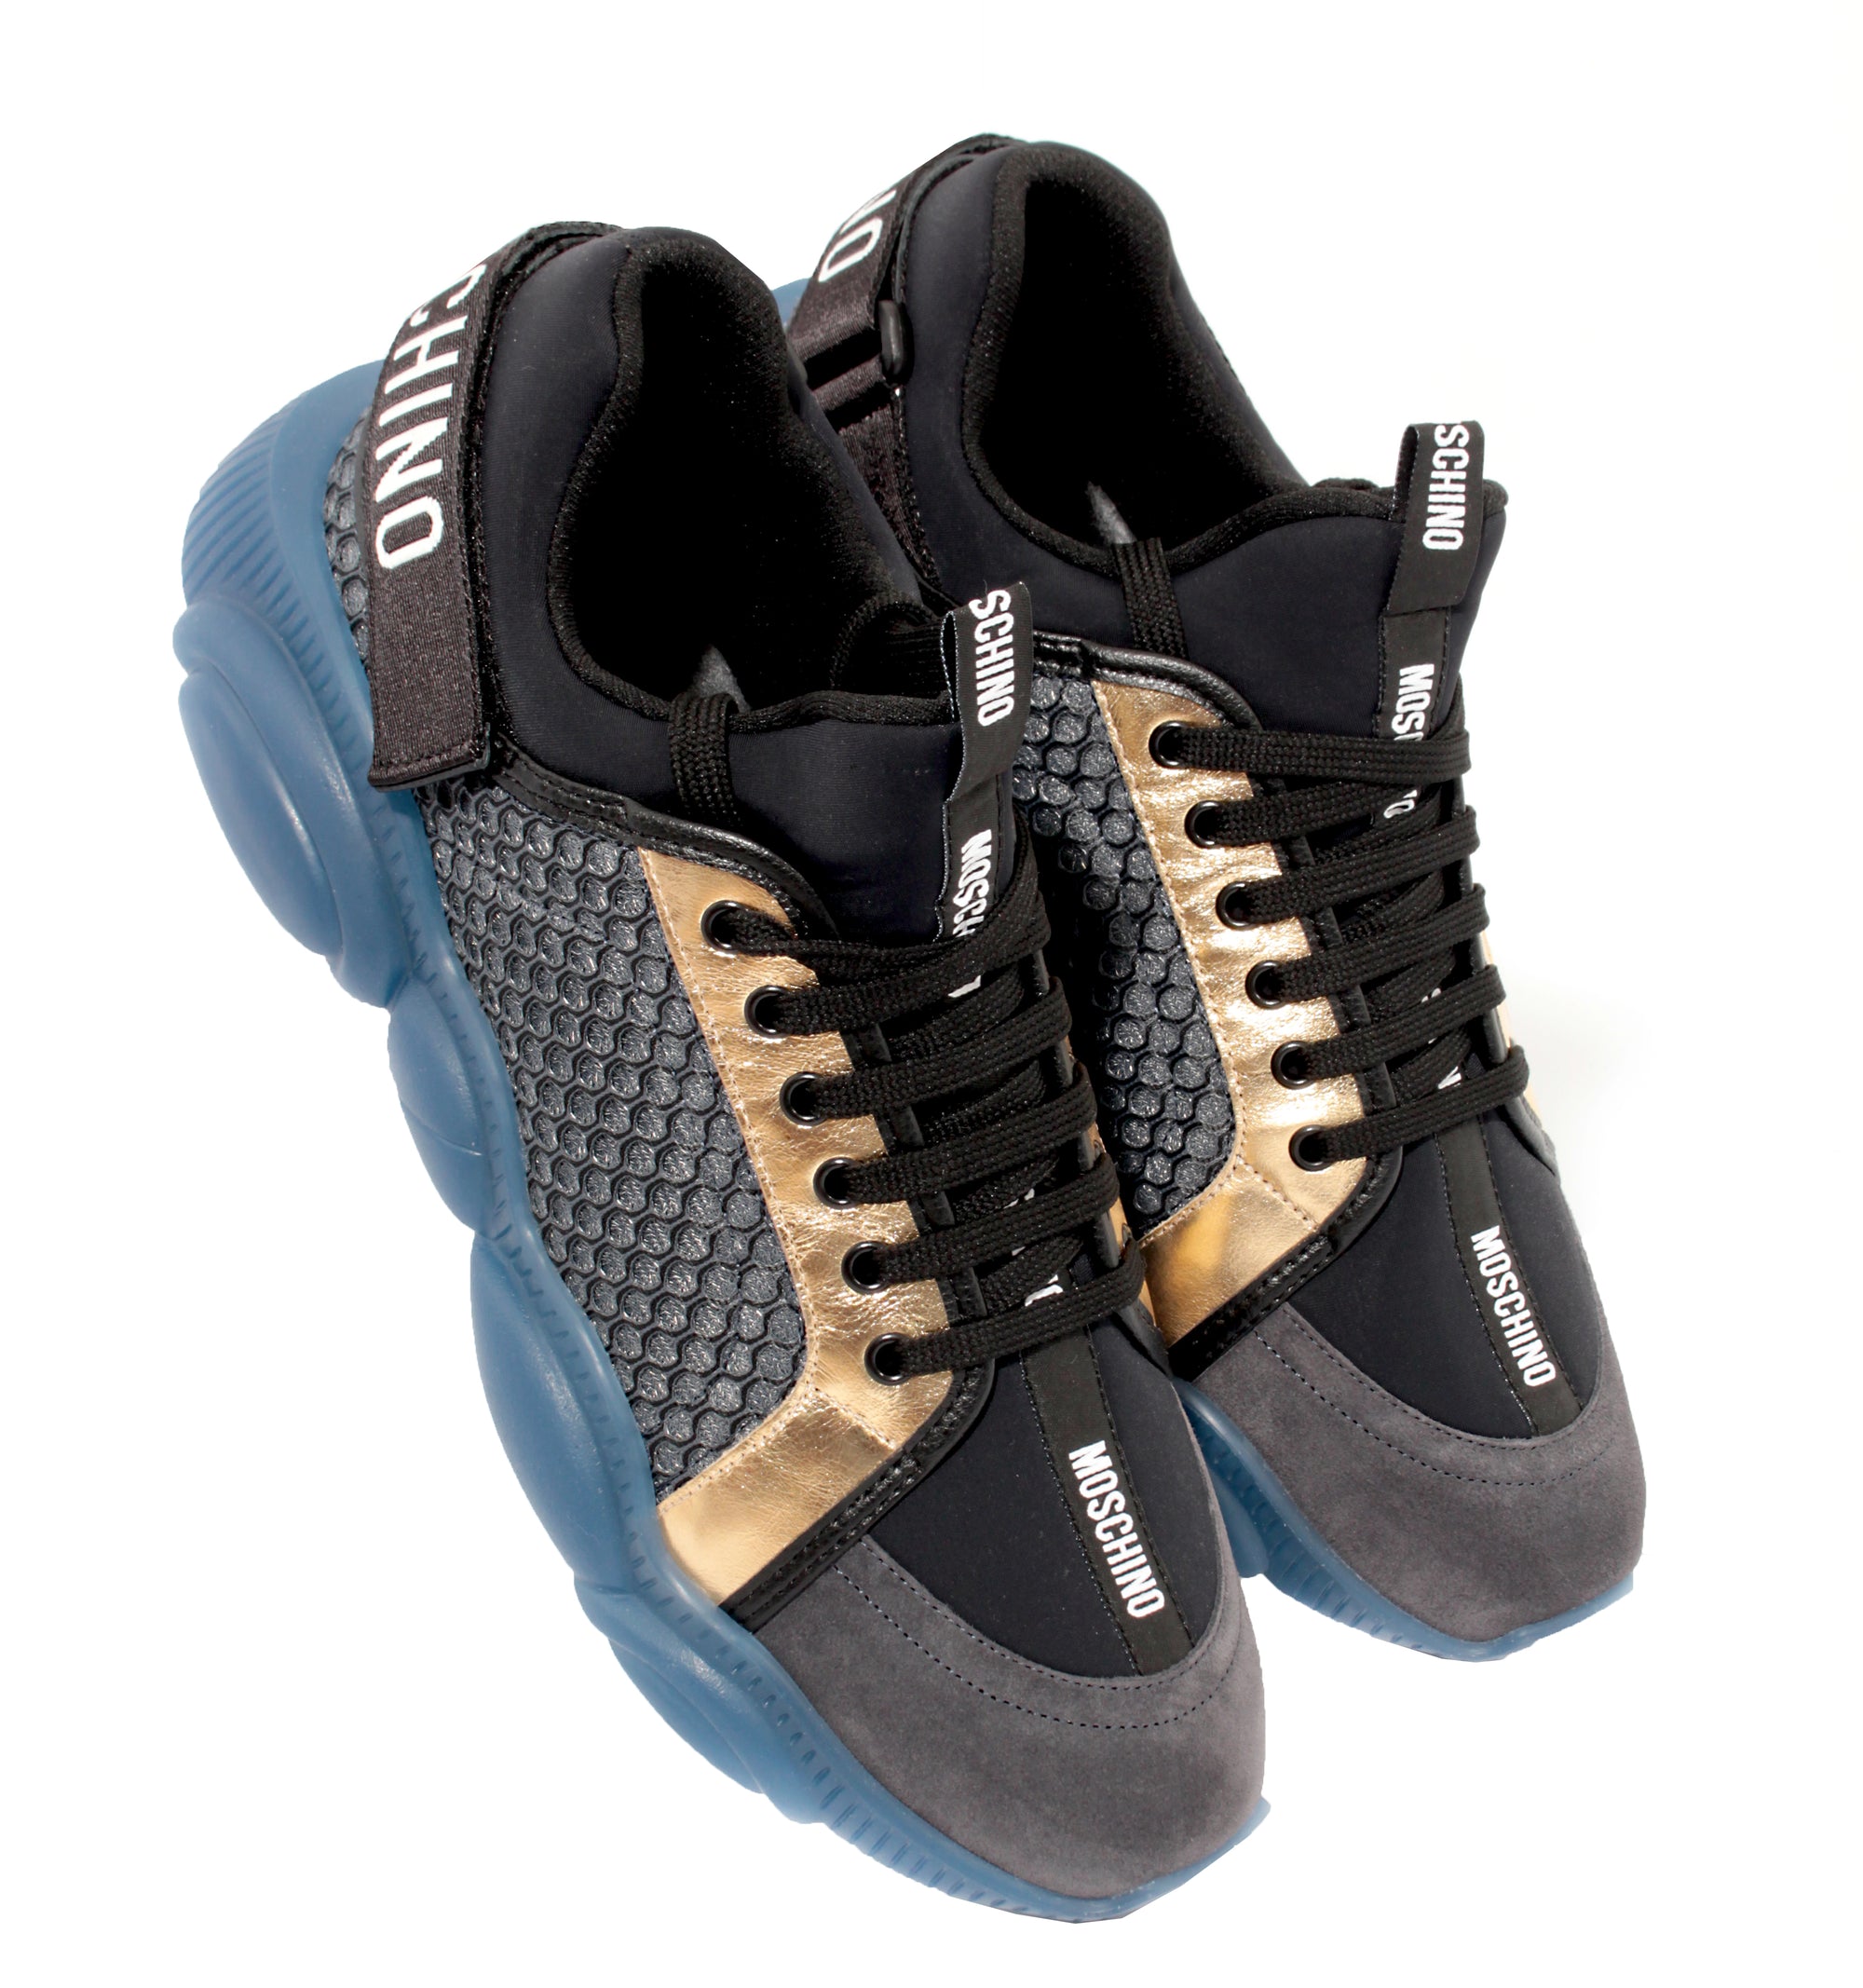 Moschino Sneakers - Grey Gold & Blue